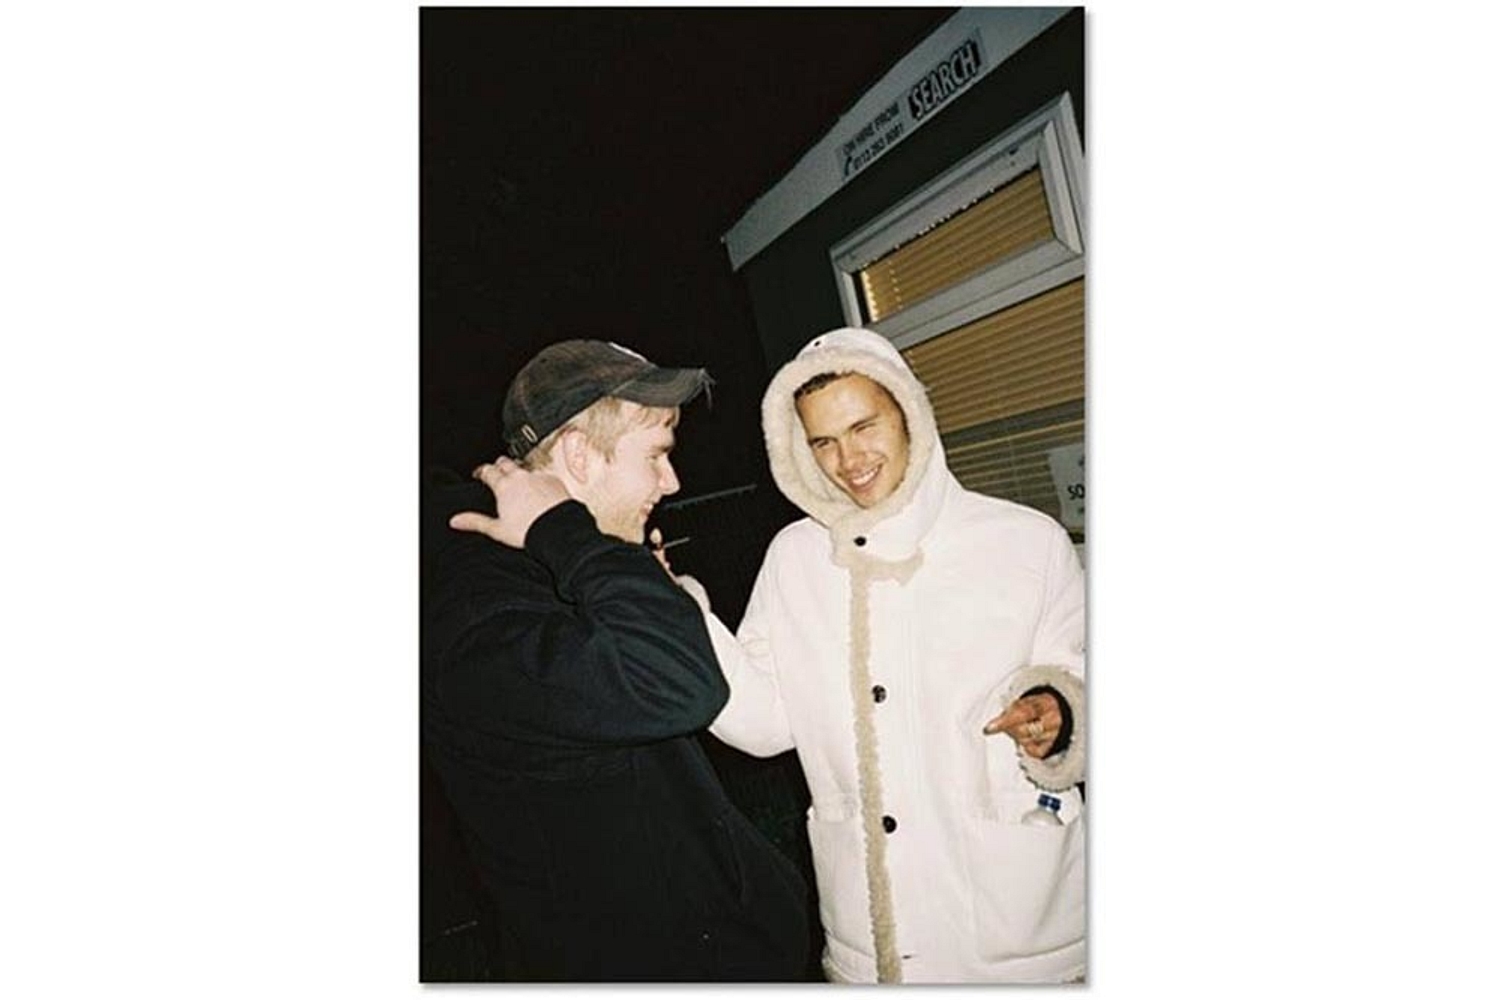 Mura Masa and slowthai team up for new track 'Deal Wiv It'